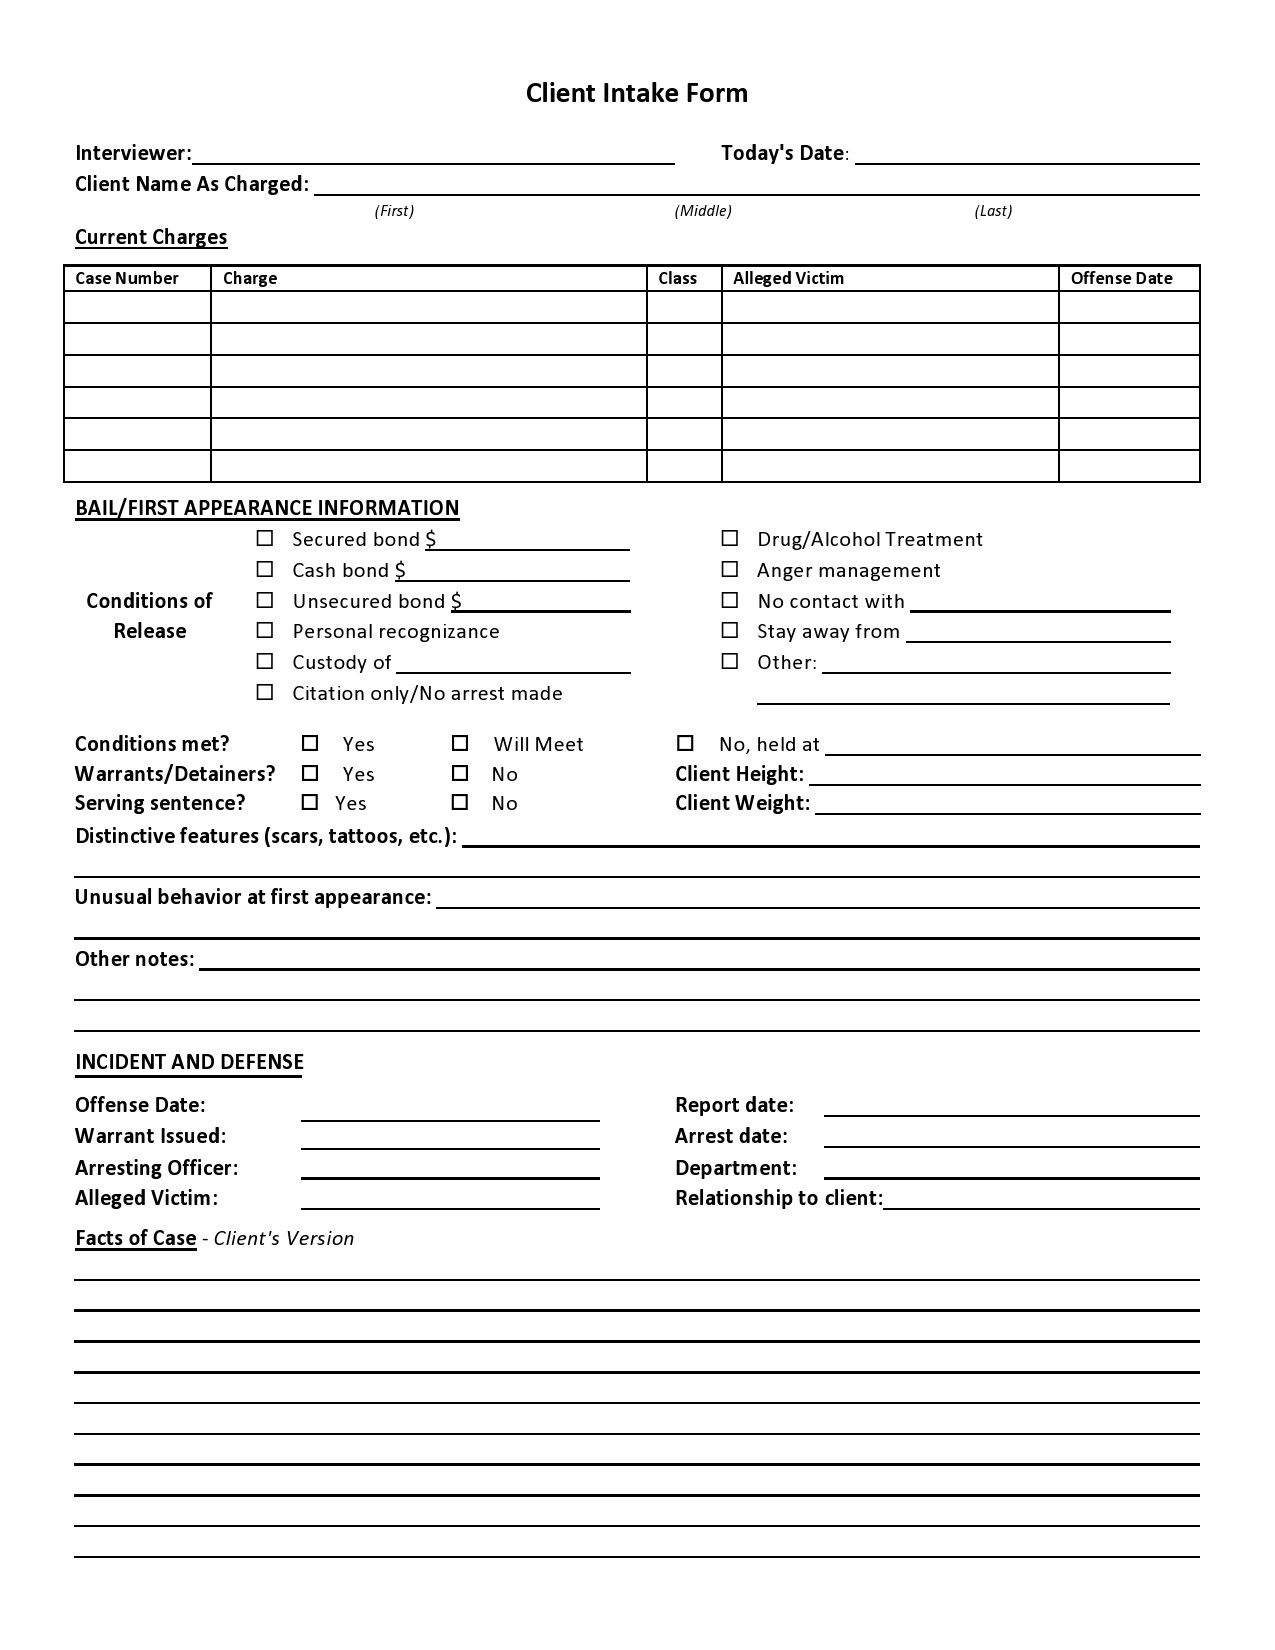 Free client intake form 09